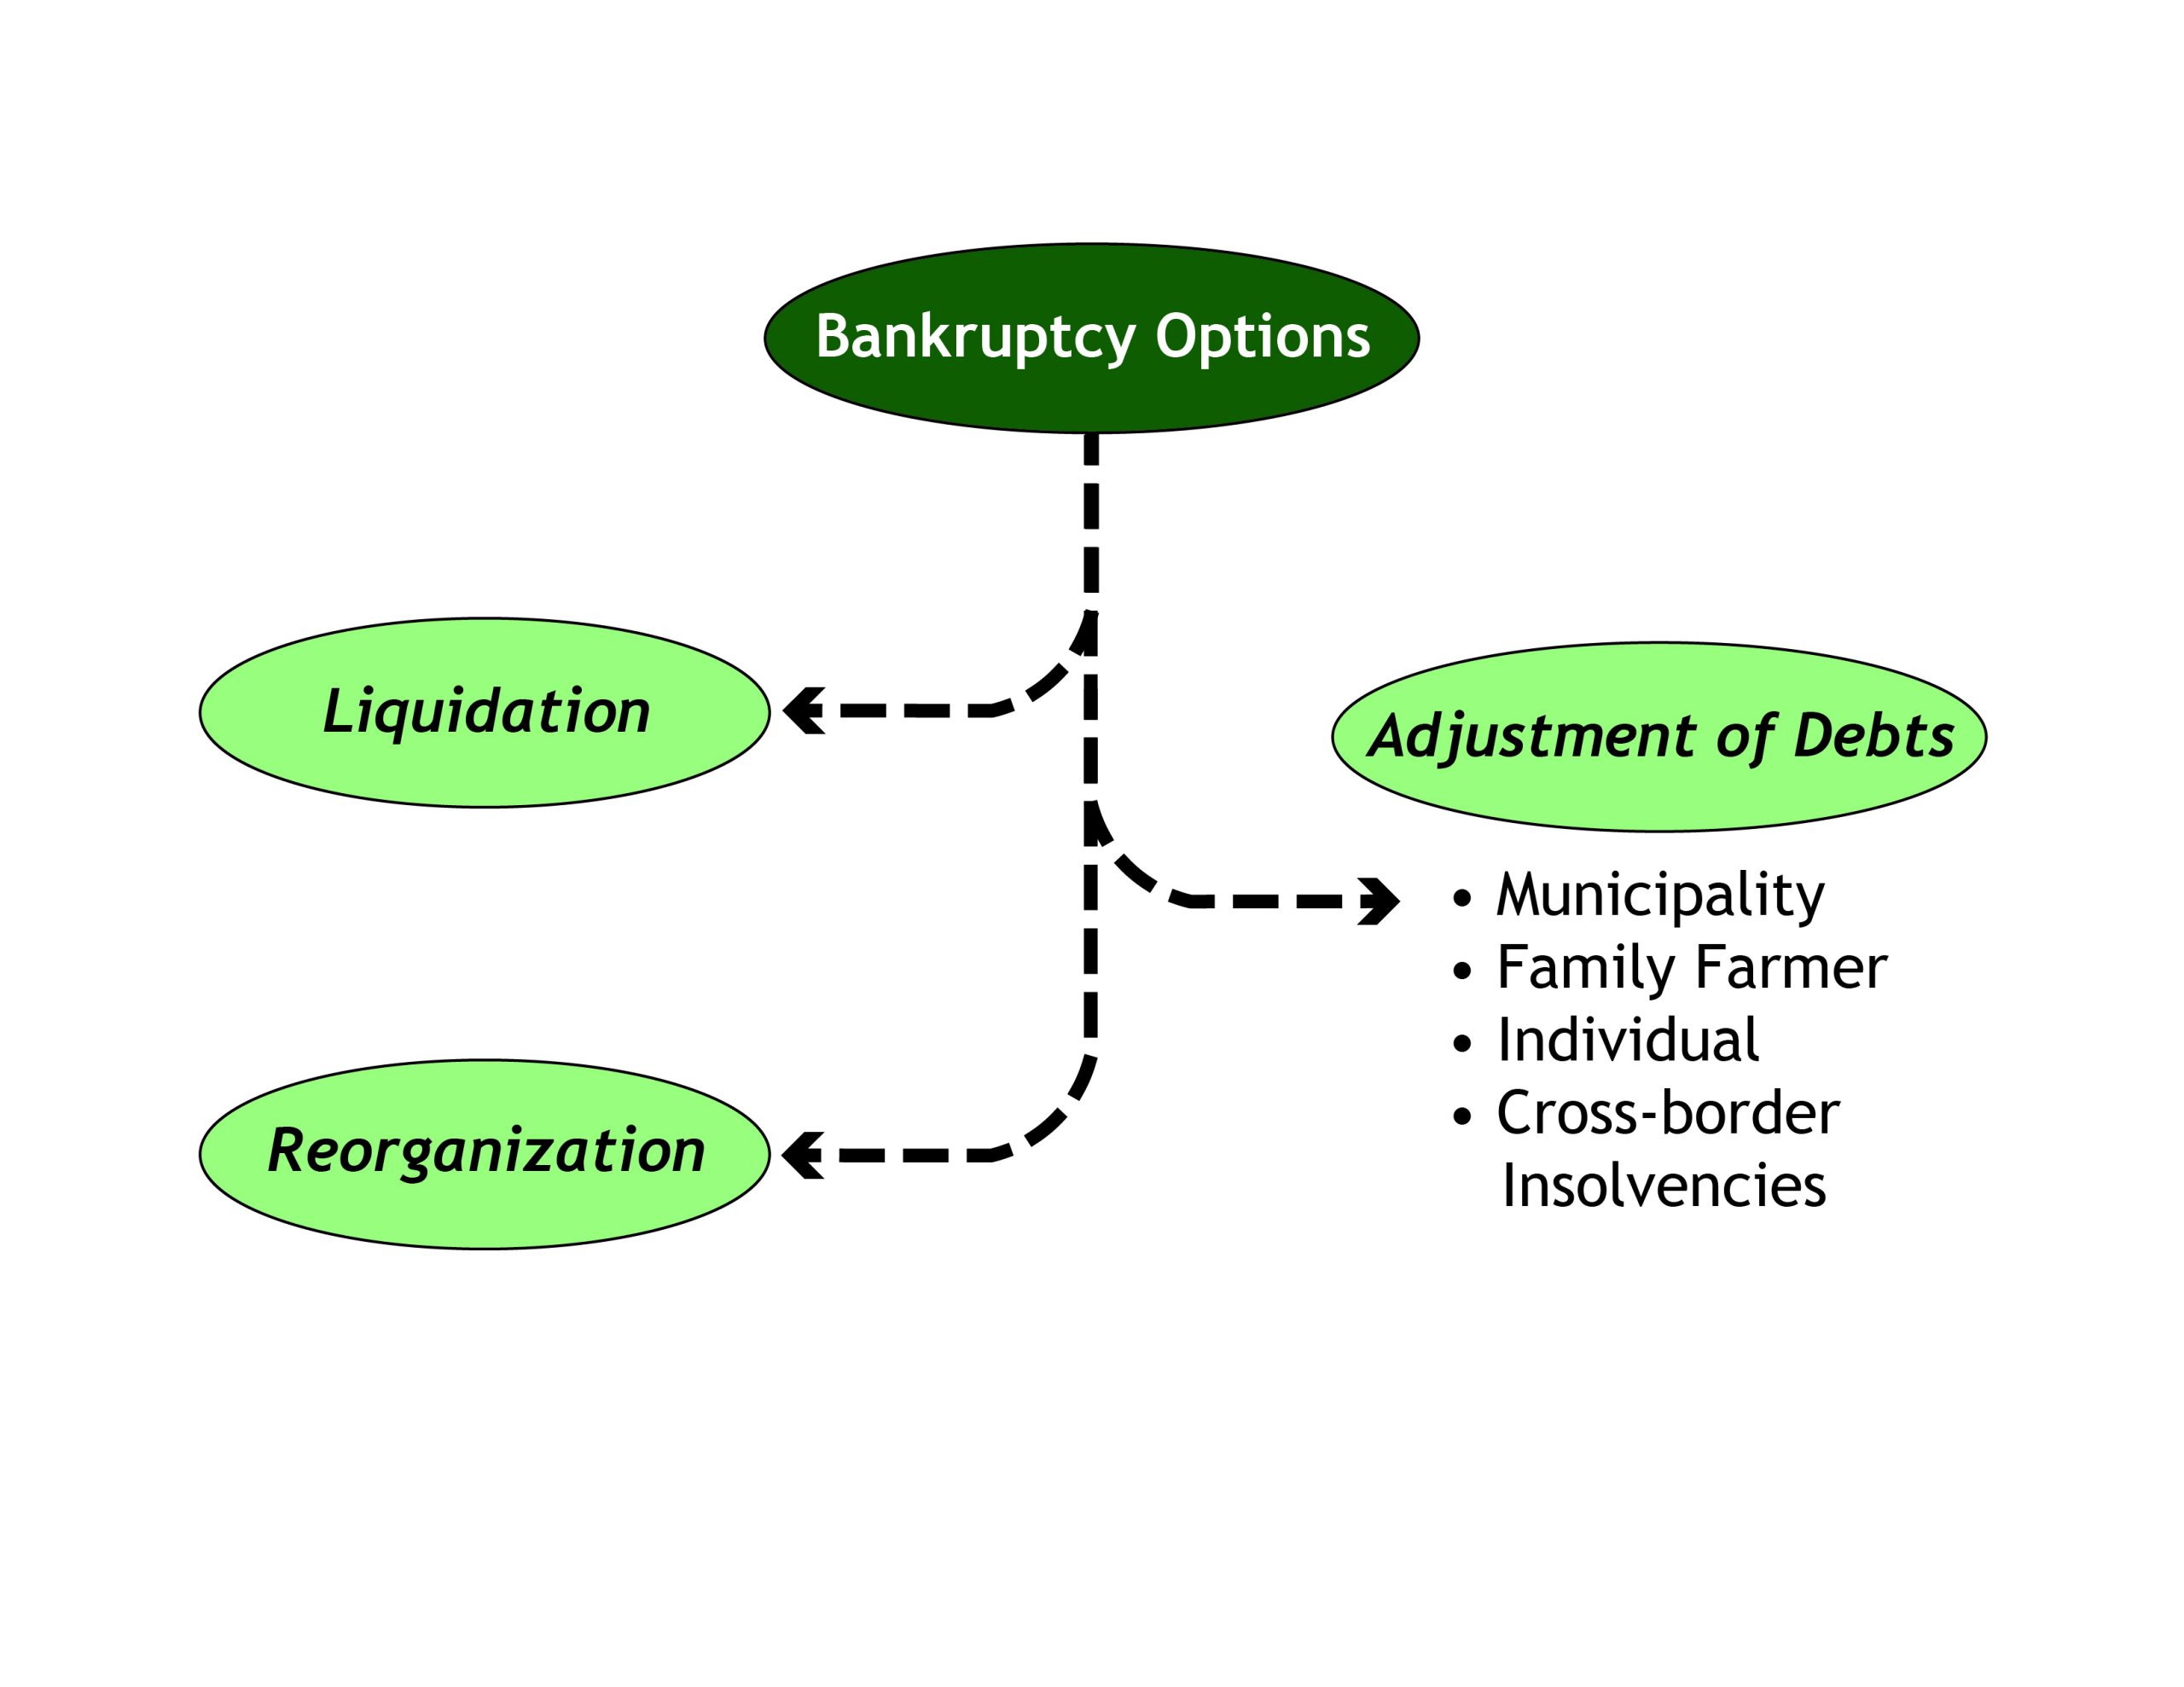 Graphic showing three types of bankruptcy options